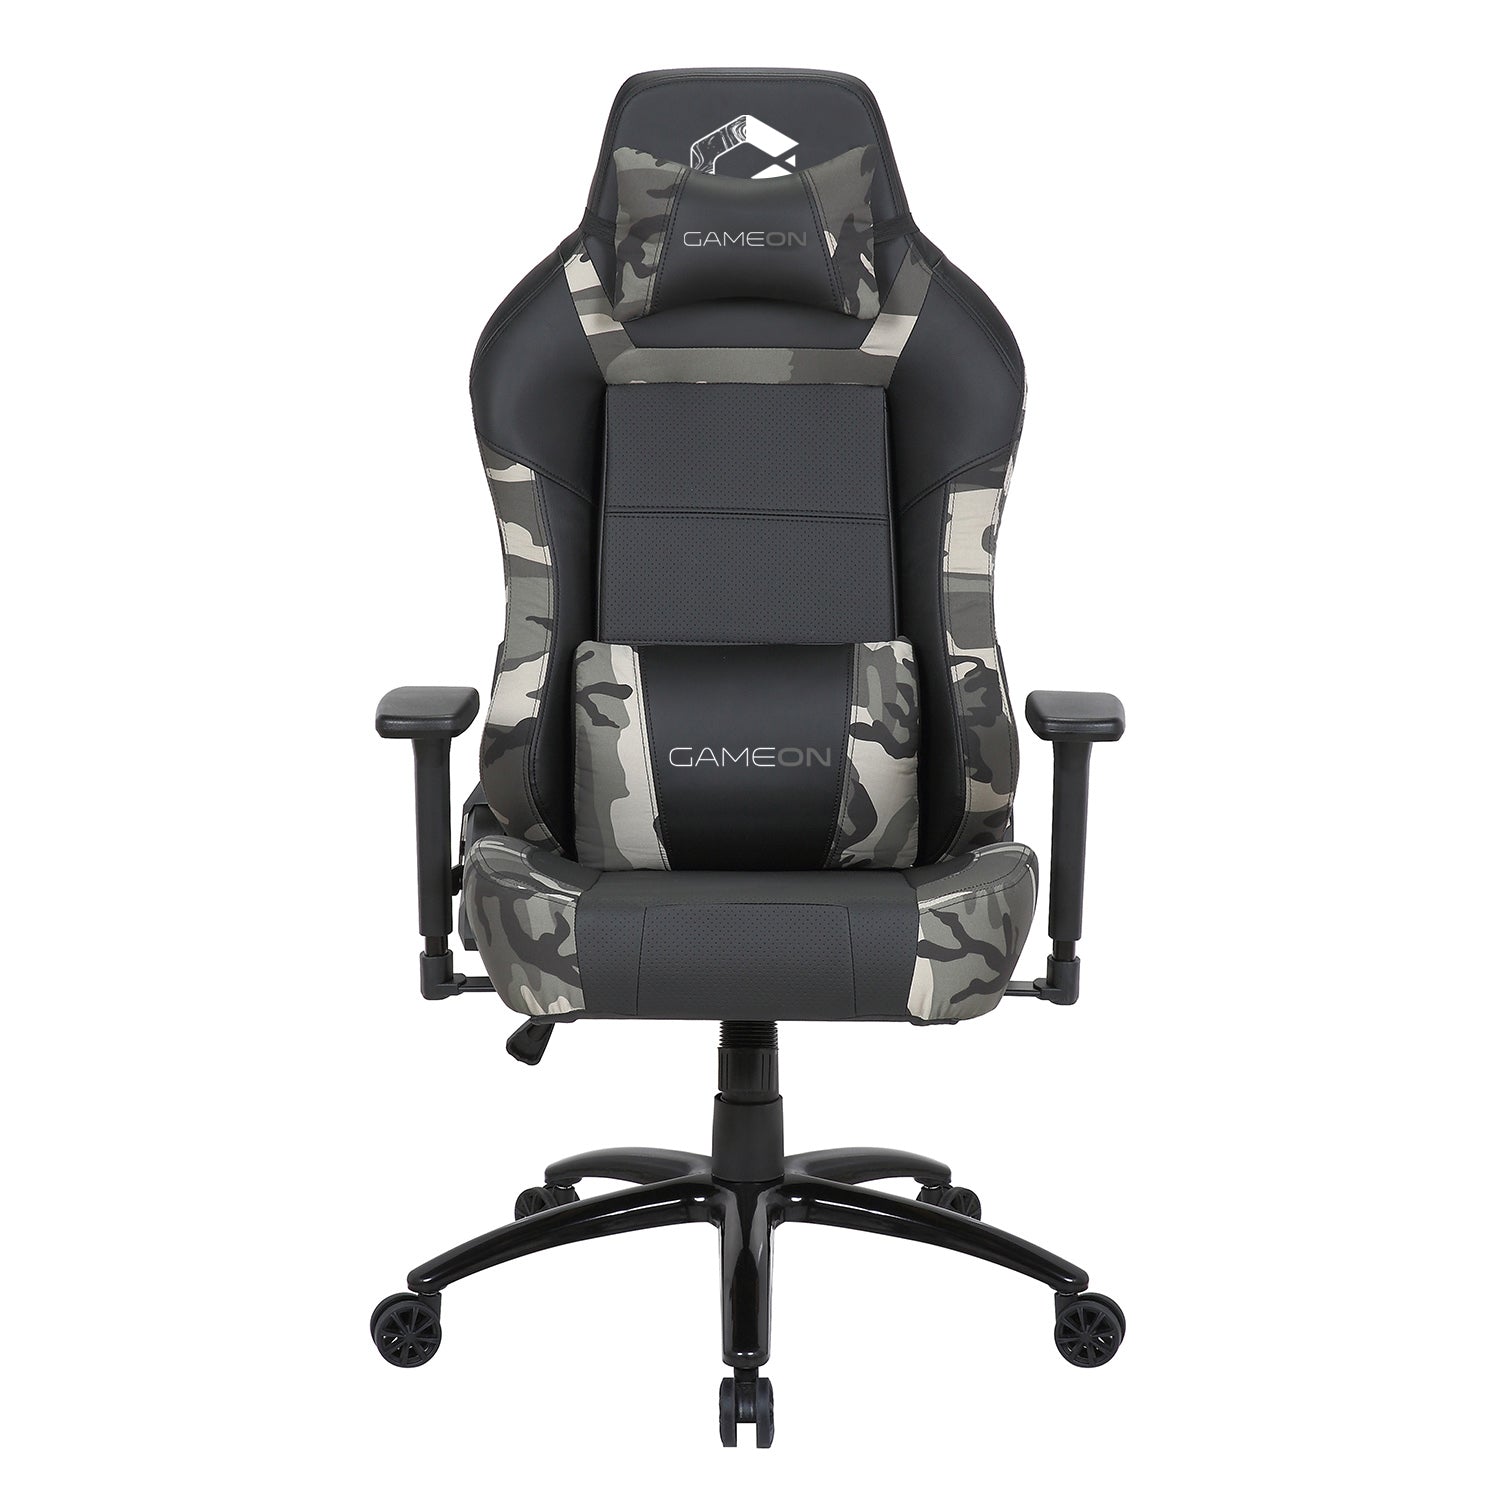 Game On Gaming Chair - Black/Gray Camo, 3D Arm Rest, Backrest, Head Pillow, Lumbar